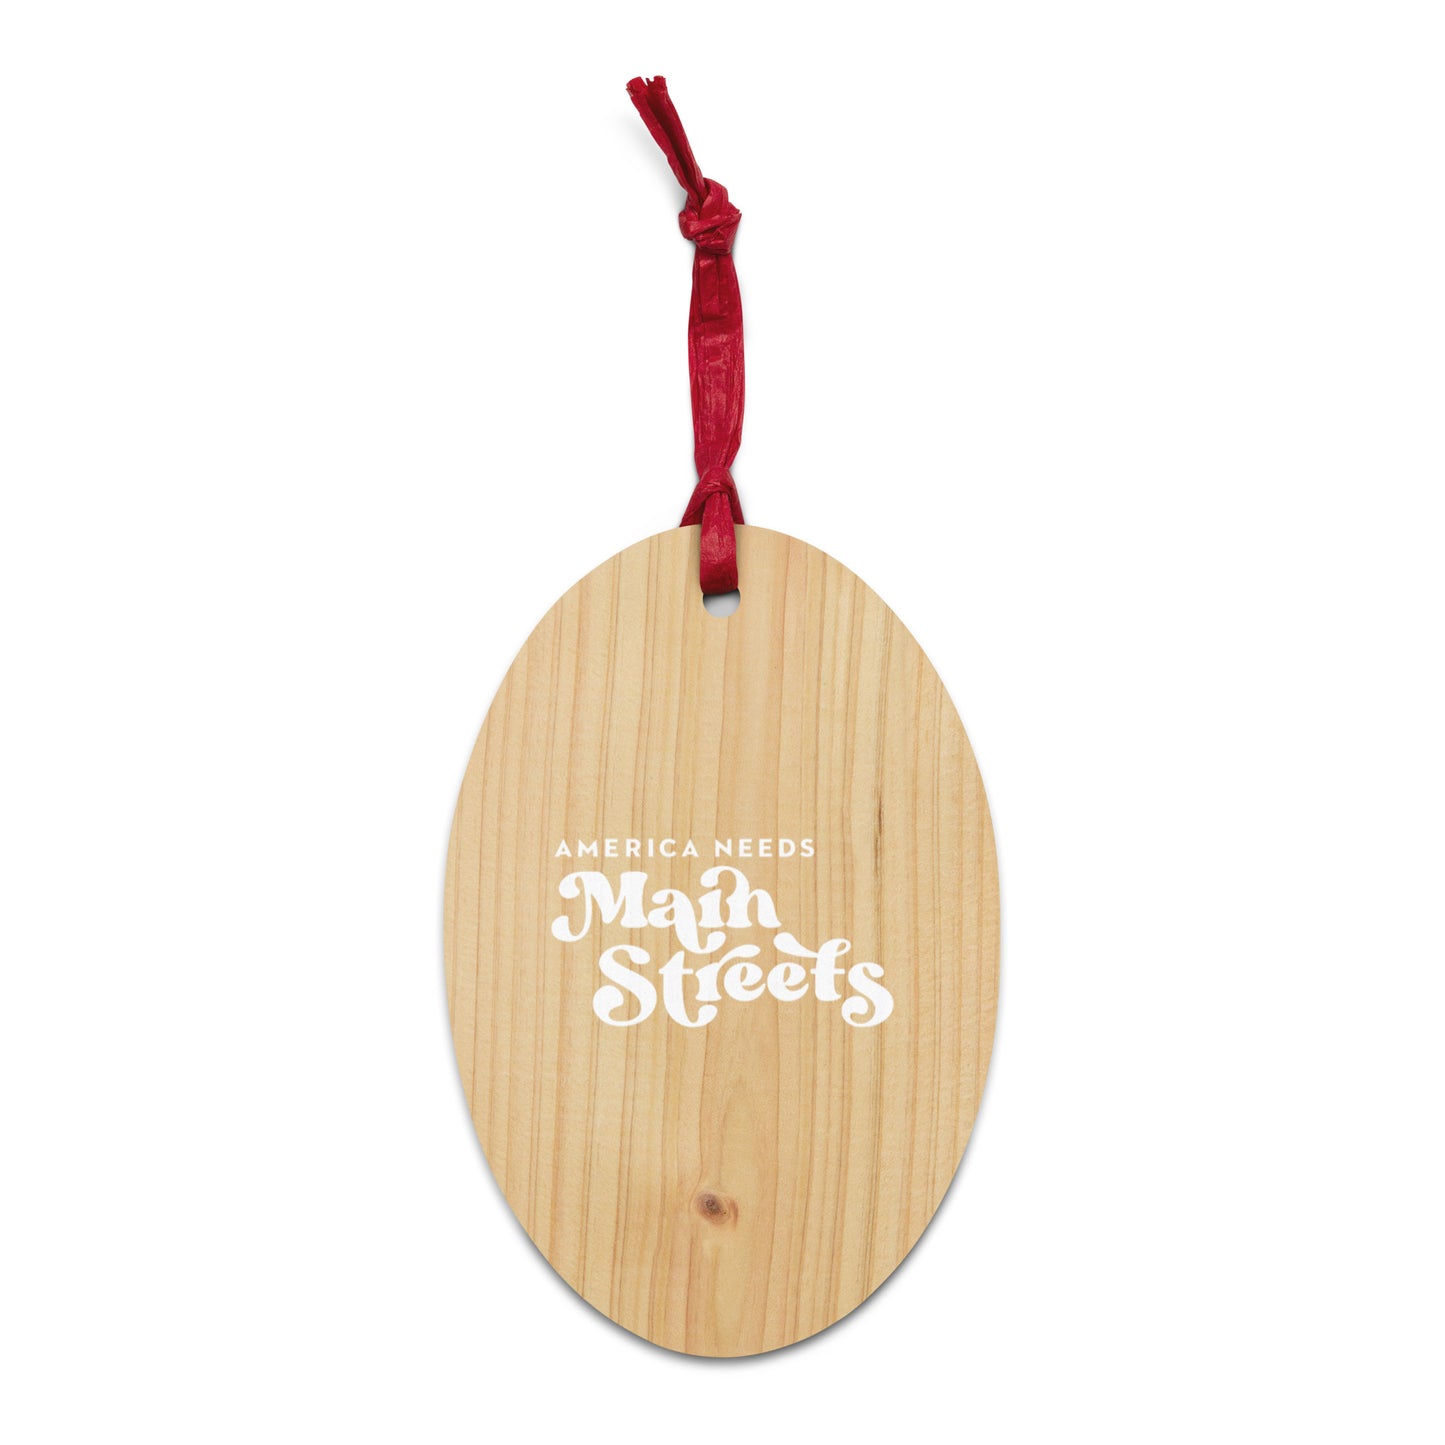 "America Needs Main Streets" Wooden Ornaments